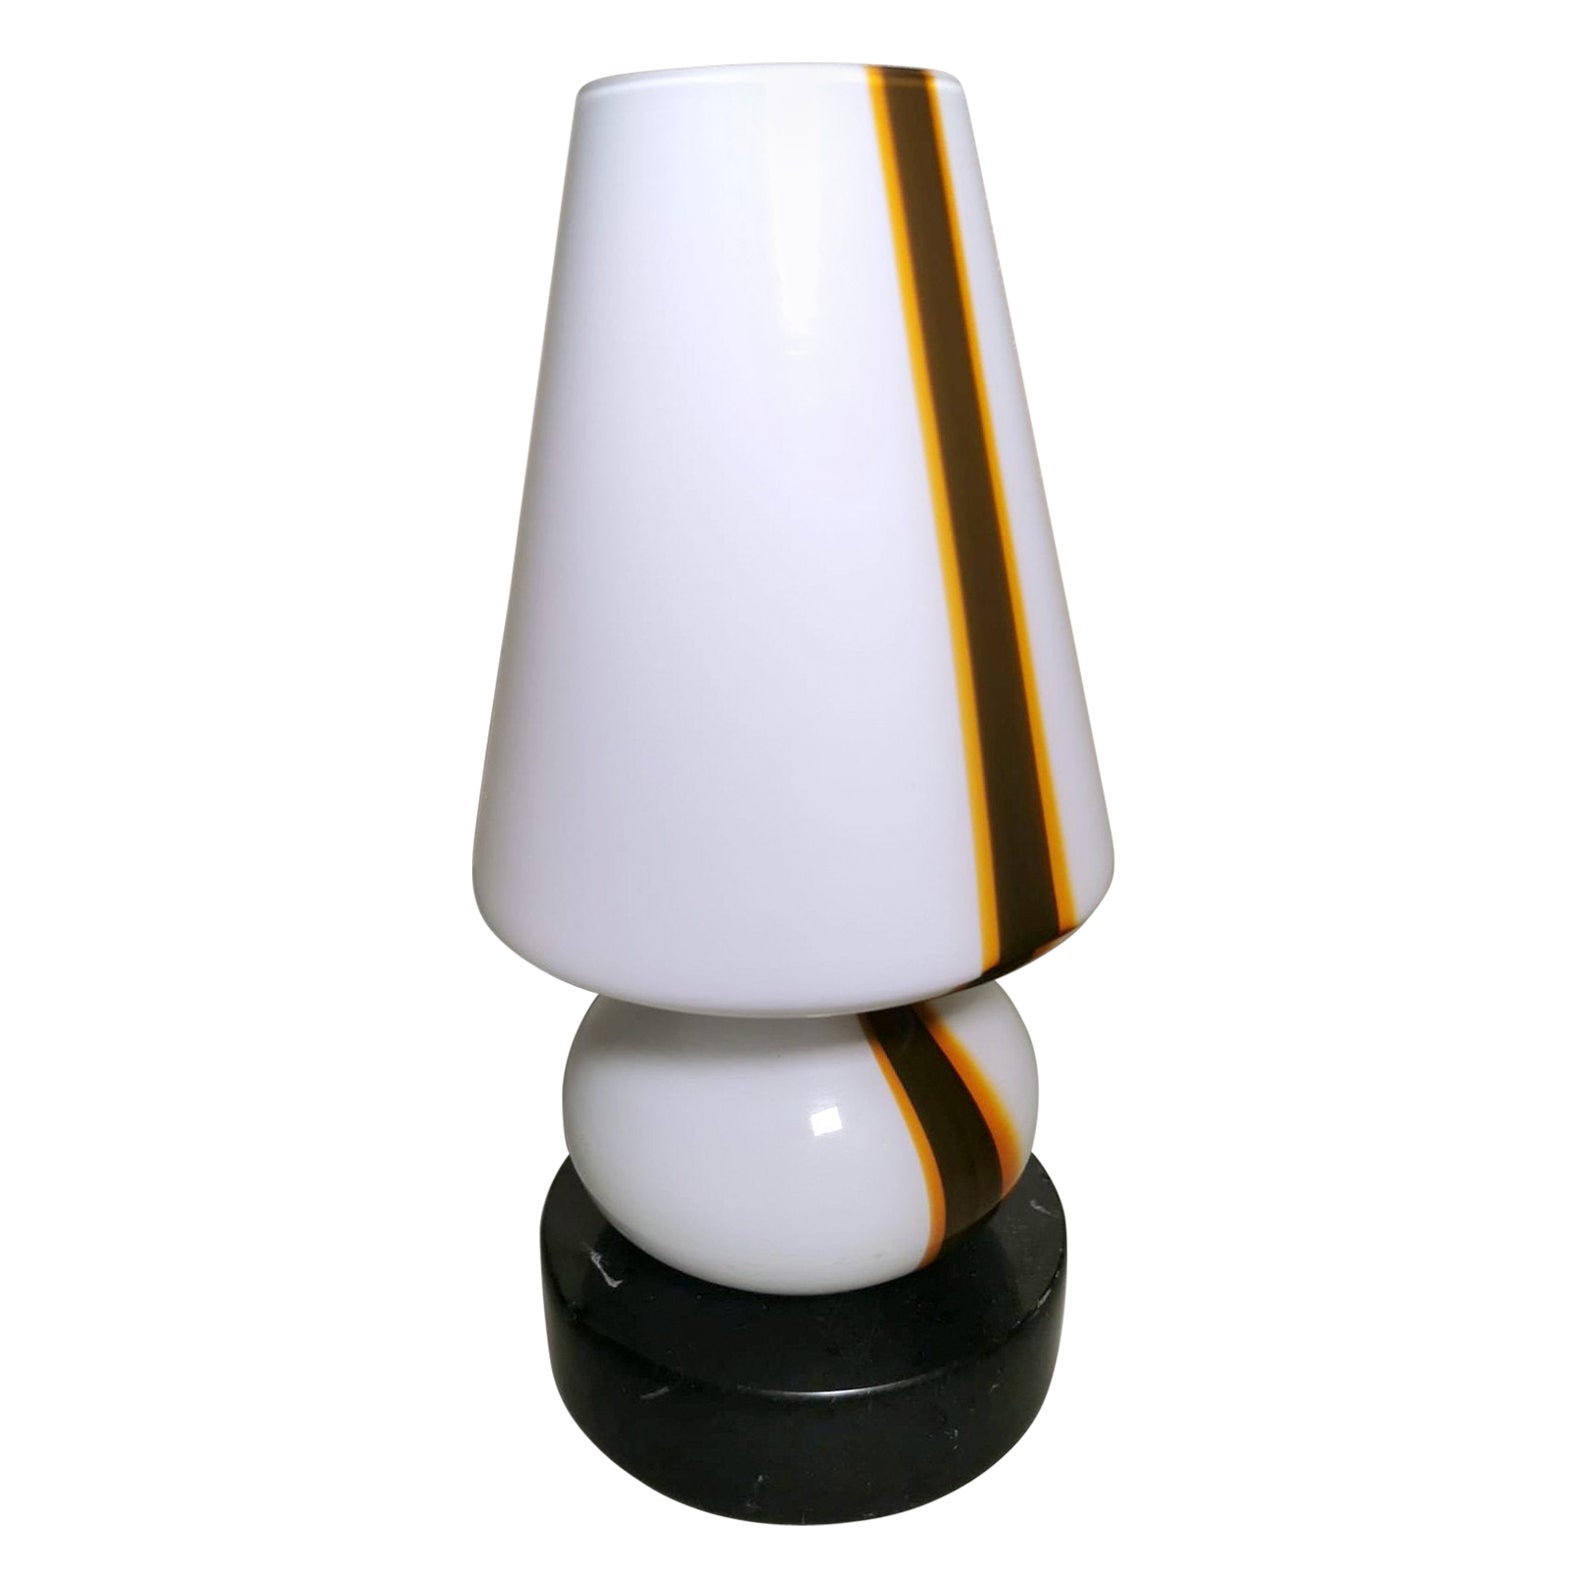 Carlo Moretti Style Space Age Lamp from Murano in Opaline Glass and Marble Base